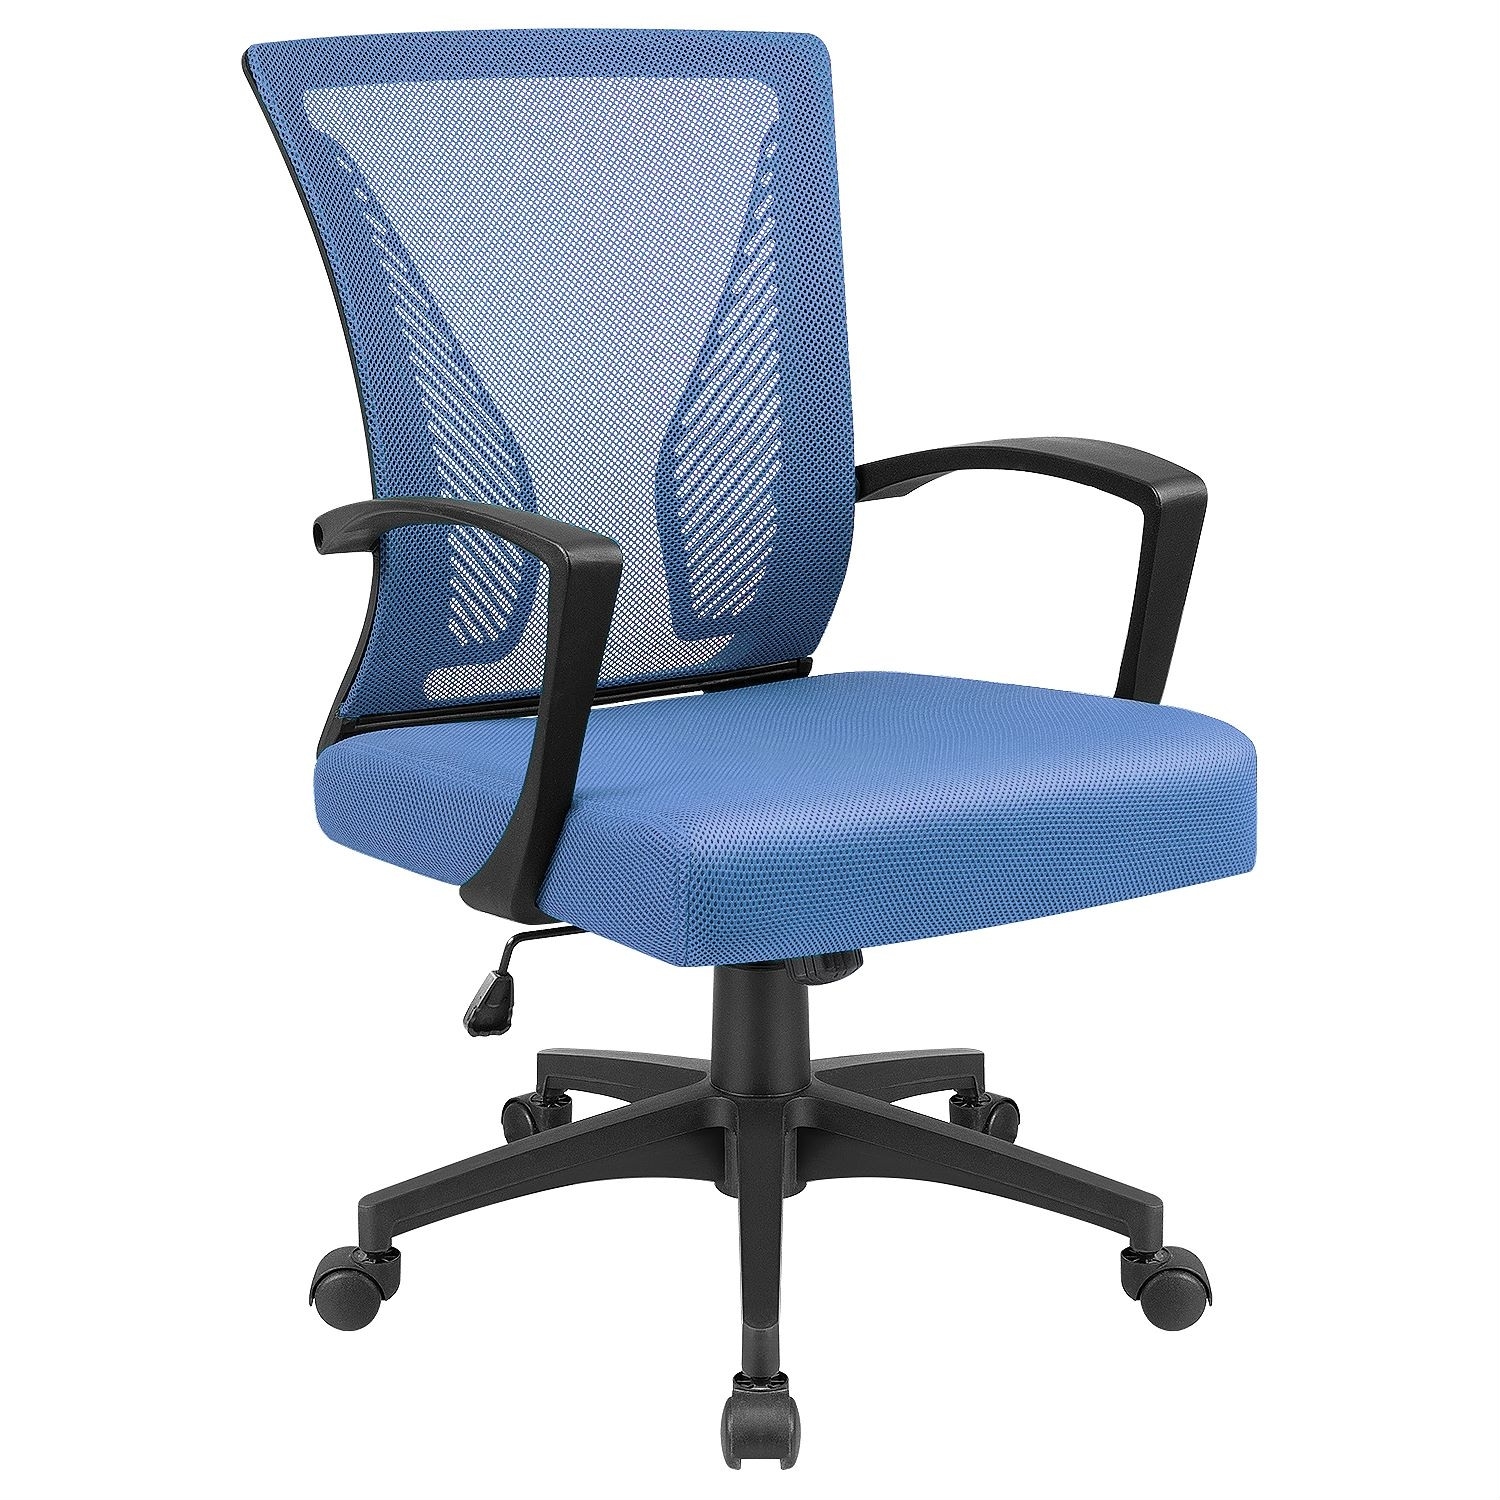 https://ak1.ostkcdn.com/images/products/is/images/direct/046d201e0c274904f5856da1e604d4f1b4a00910/Office-Chair-Mid-Back-Swivel-Lumbar-Support-Desk-Chair%2C-Computer-Ergonomic-Mesh-Chair-with-Armrest.jpg